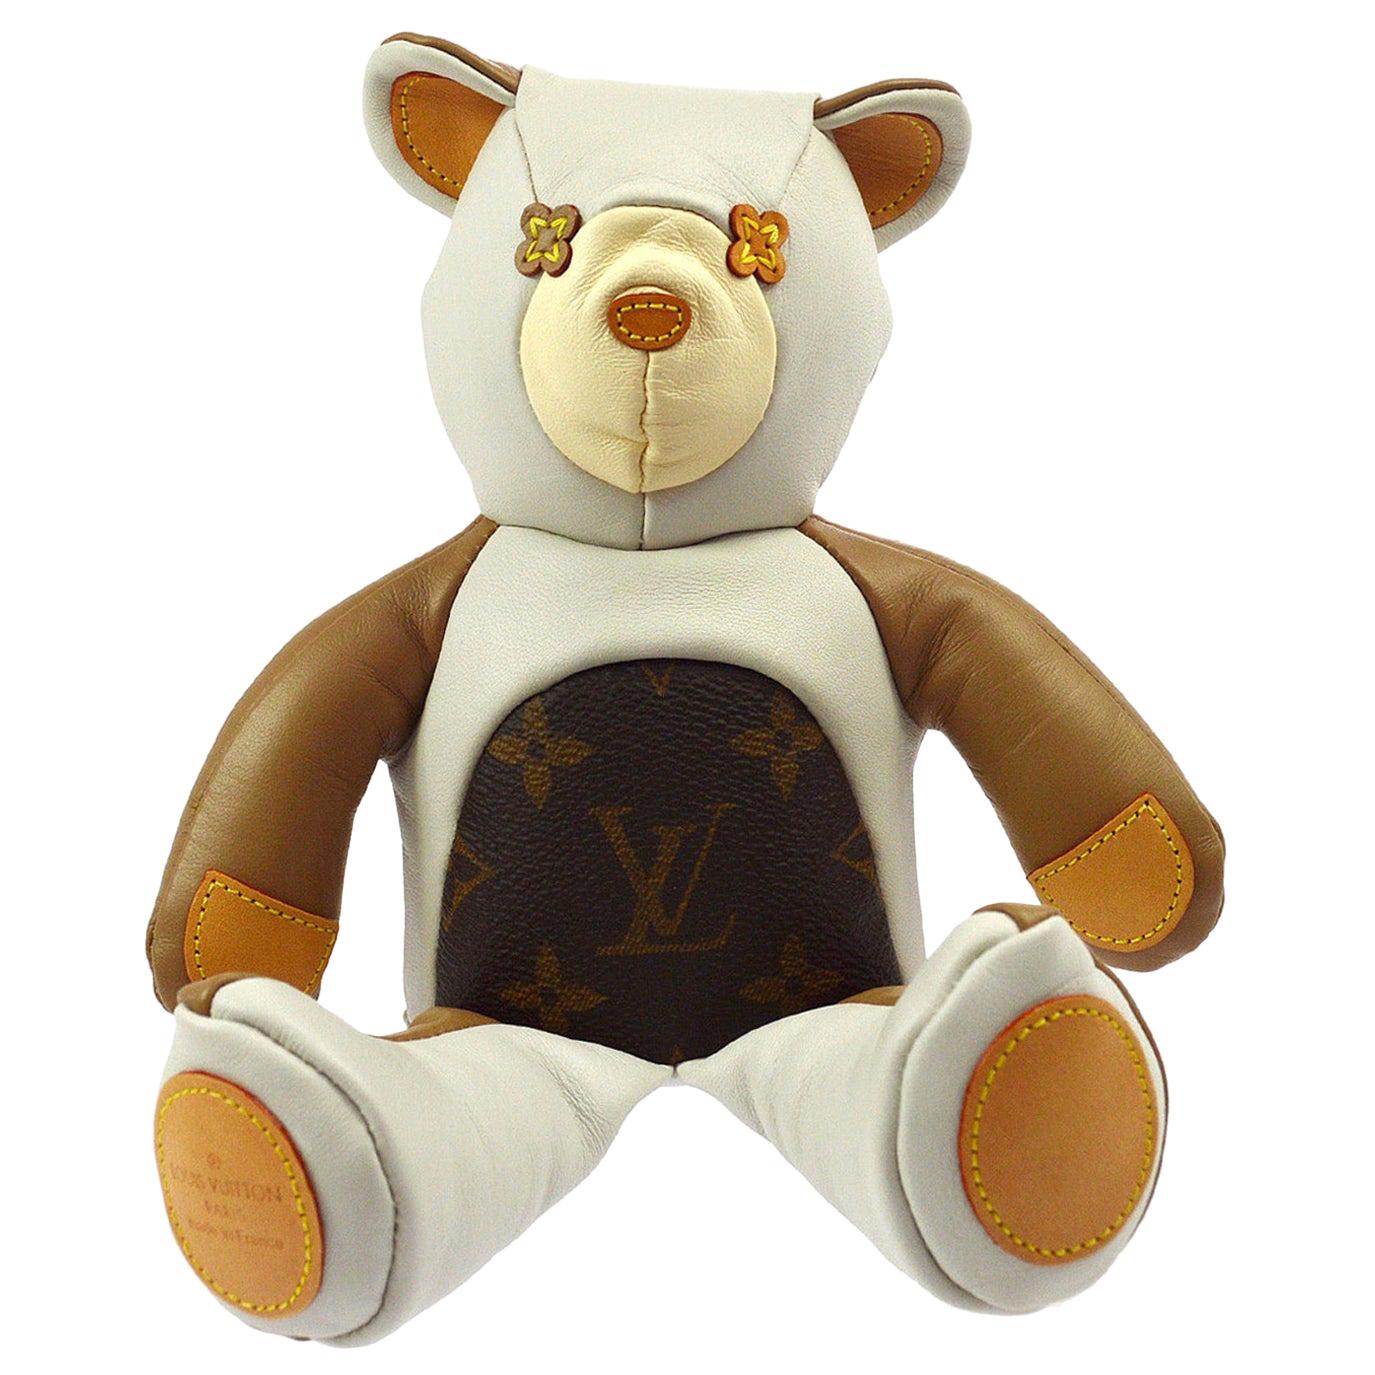 Louis Vuitton Ivory Brown Monogram Canvas Leather Toy Novelty Teddy Bear